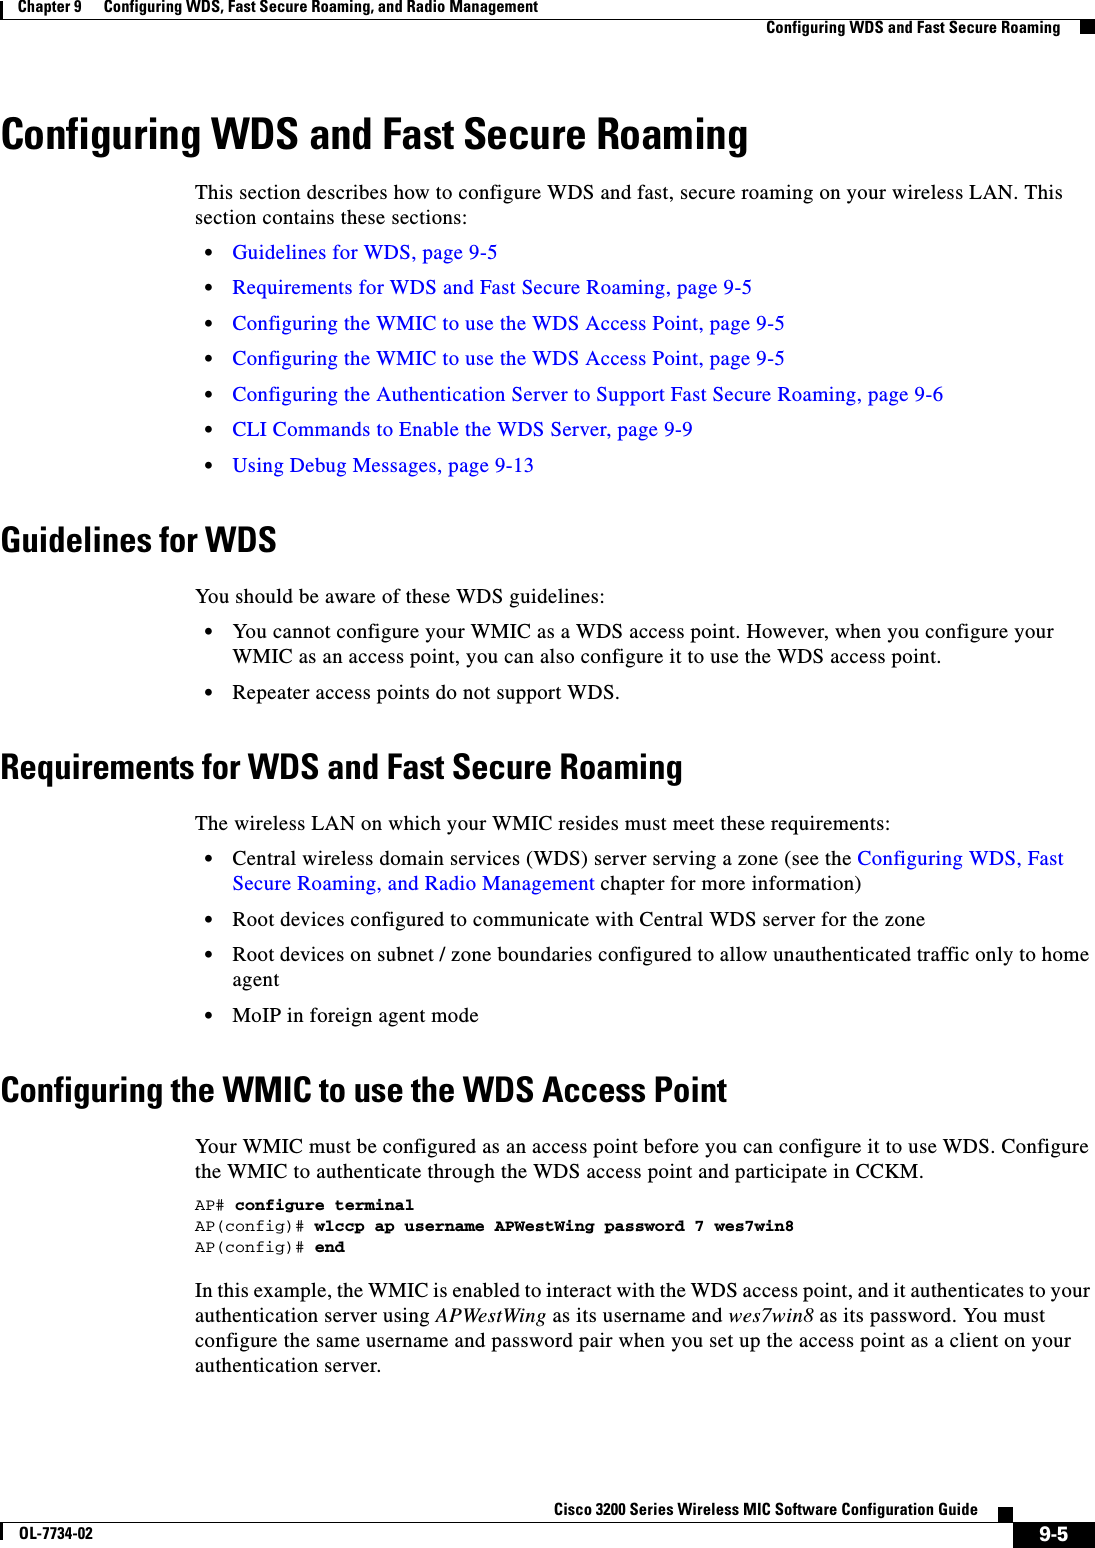 9-5Cisco 3200 Series Wireless MIC Software Configuration GuideOL-7734-02Chapter 9      Configuring WDS, Fast Secure Roaming, and Radio ManagementConfiguring WDS and Fast Secure RoamingConfiguring WDS and Fast Secure RoamingThis section describes how to configure WDS and fast, secure roaming on your wireless LAN. This section contains these sections:•Guidelines for WDS, page 9-5•Requirements for WDS and Fast Secure Roaming, page 9-5•Configuring the WMIC to use the WDS Access Point, page 9-5•Configuring the WMIC to use the WDS Access Point, page 9-5•Configuring the Authentication Server to Support Fast Secure Roaming, page 9-6•CLI Commands to Enable the WDS Server, page 9-9•Using Debug Messages, page 9-13Guidelines for WDSYou should be aware of these WDS guidelines:•You cannot configure your WMIC as a WDS access point. However, when you configure your WMIC as an access point, you can also configure it to use the WDS access point.•Repeater access points do not support WDS. Requirements for WDS and Fast Secure RoamingThe wireless LAN on which your WMIC resides must meet these requirements:•Central wireless domain services (WDS) server serving a zone (see the Configuring WDS, Fast Secure Roaming, and Radio Management chapter for more information)•Root devices configured to communicate with Central WDS server for the zone•Root devices on subnet / zone boundaries configured to allow unauthenticated traffic only to home agent•MoIP in foreign agent modeConfiguring the WMIC to use the WDS Access PointYour WMIC must be configured as an access point before you can configure it to use WDS. Configure the WMIC to authenticate through the WDS access point and participate in CCKM.AP# configure terminalAP(config)# wlccp ap username APWestWing password 7 wes7win8AP(config)# endIn this example, the WMIC is enabled to interact with the WDS access point, and it authenticates to your authentication server using APWestWing as its username and wes7win8 as its password. You must configure the same username and password pair when you set up the access point as a client on your authentication server.